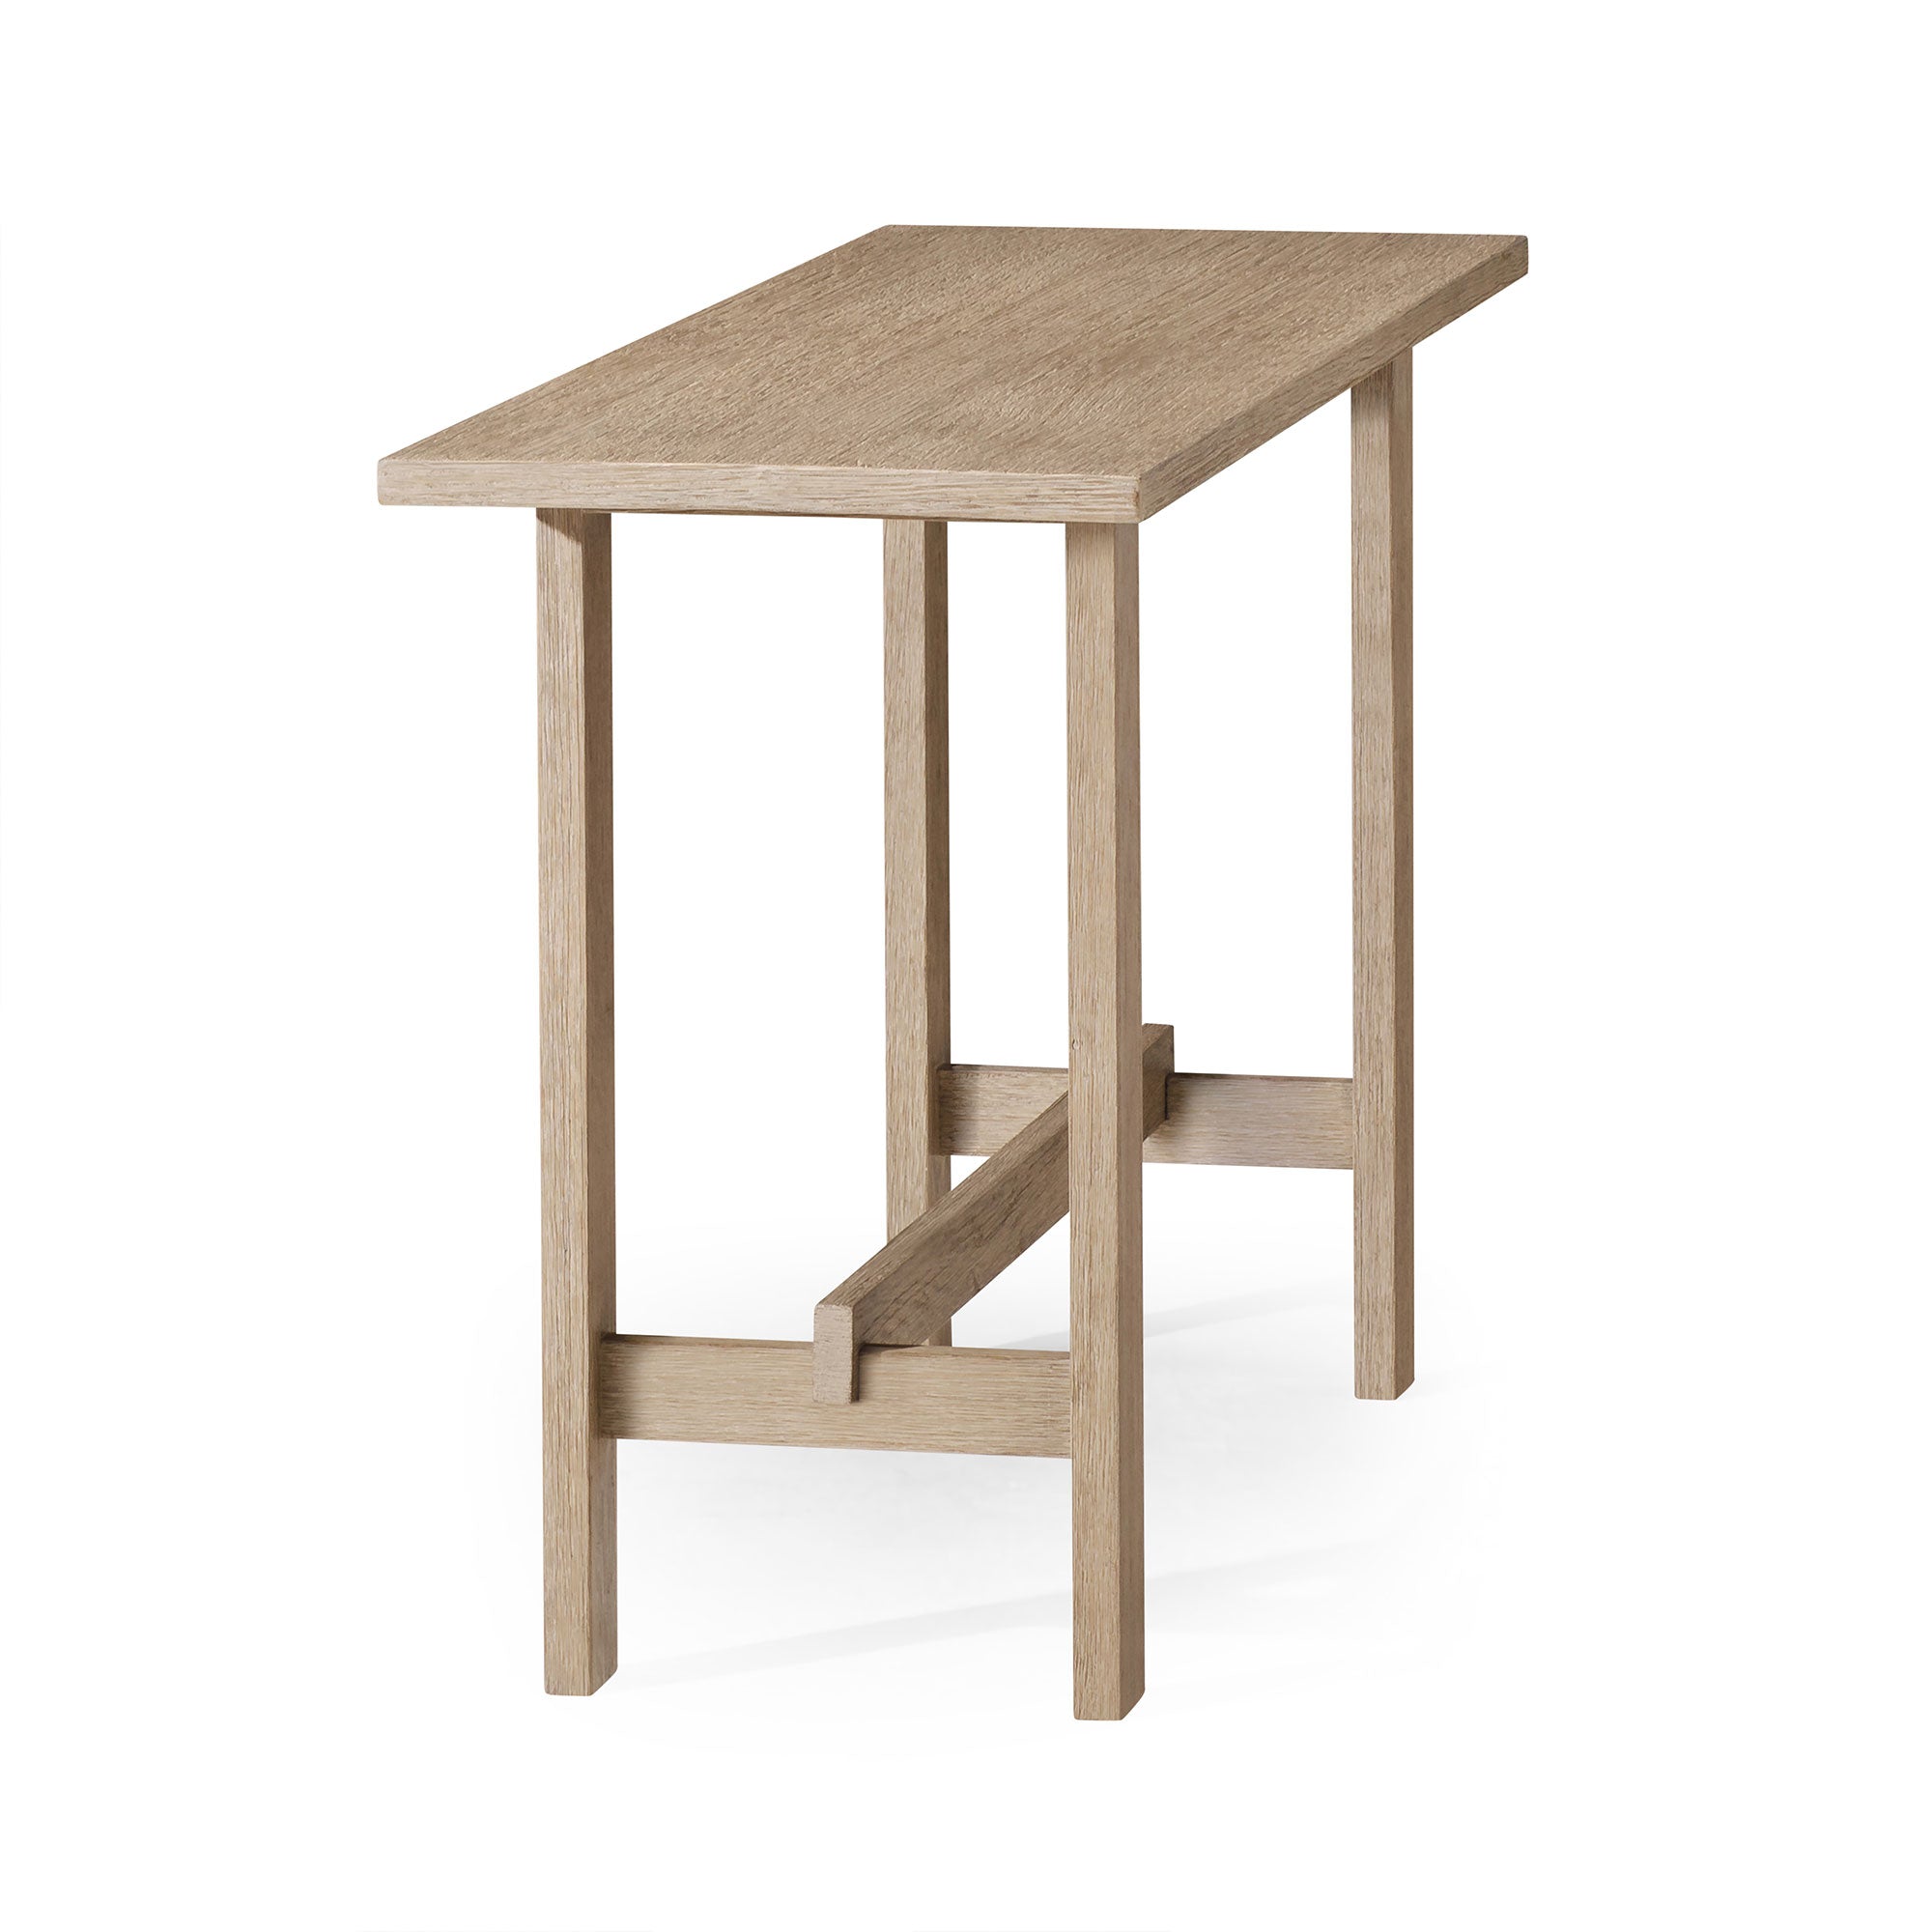 Hera Organic Wooden Console Table in Weathered Grey Finish in Accent Tables by Maven Lane